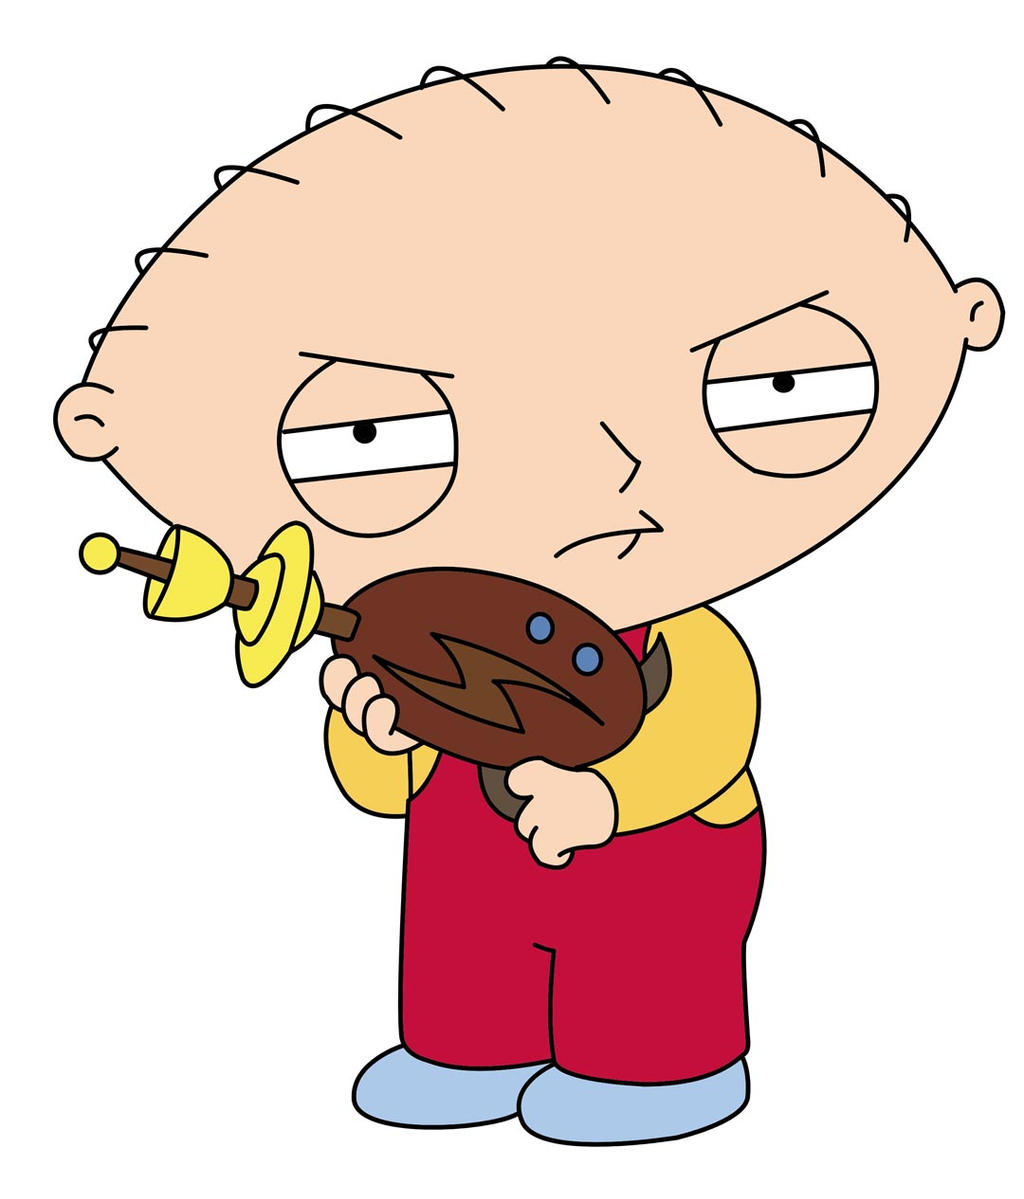 Stewie Griffin 13 By Frasier And Niles On DeviantArt.